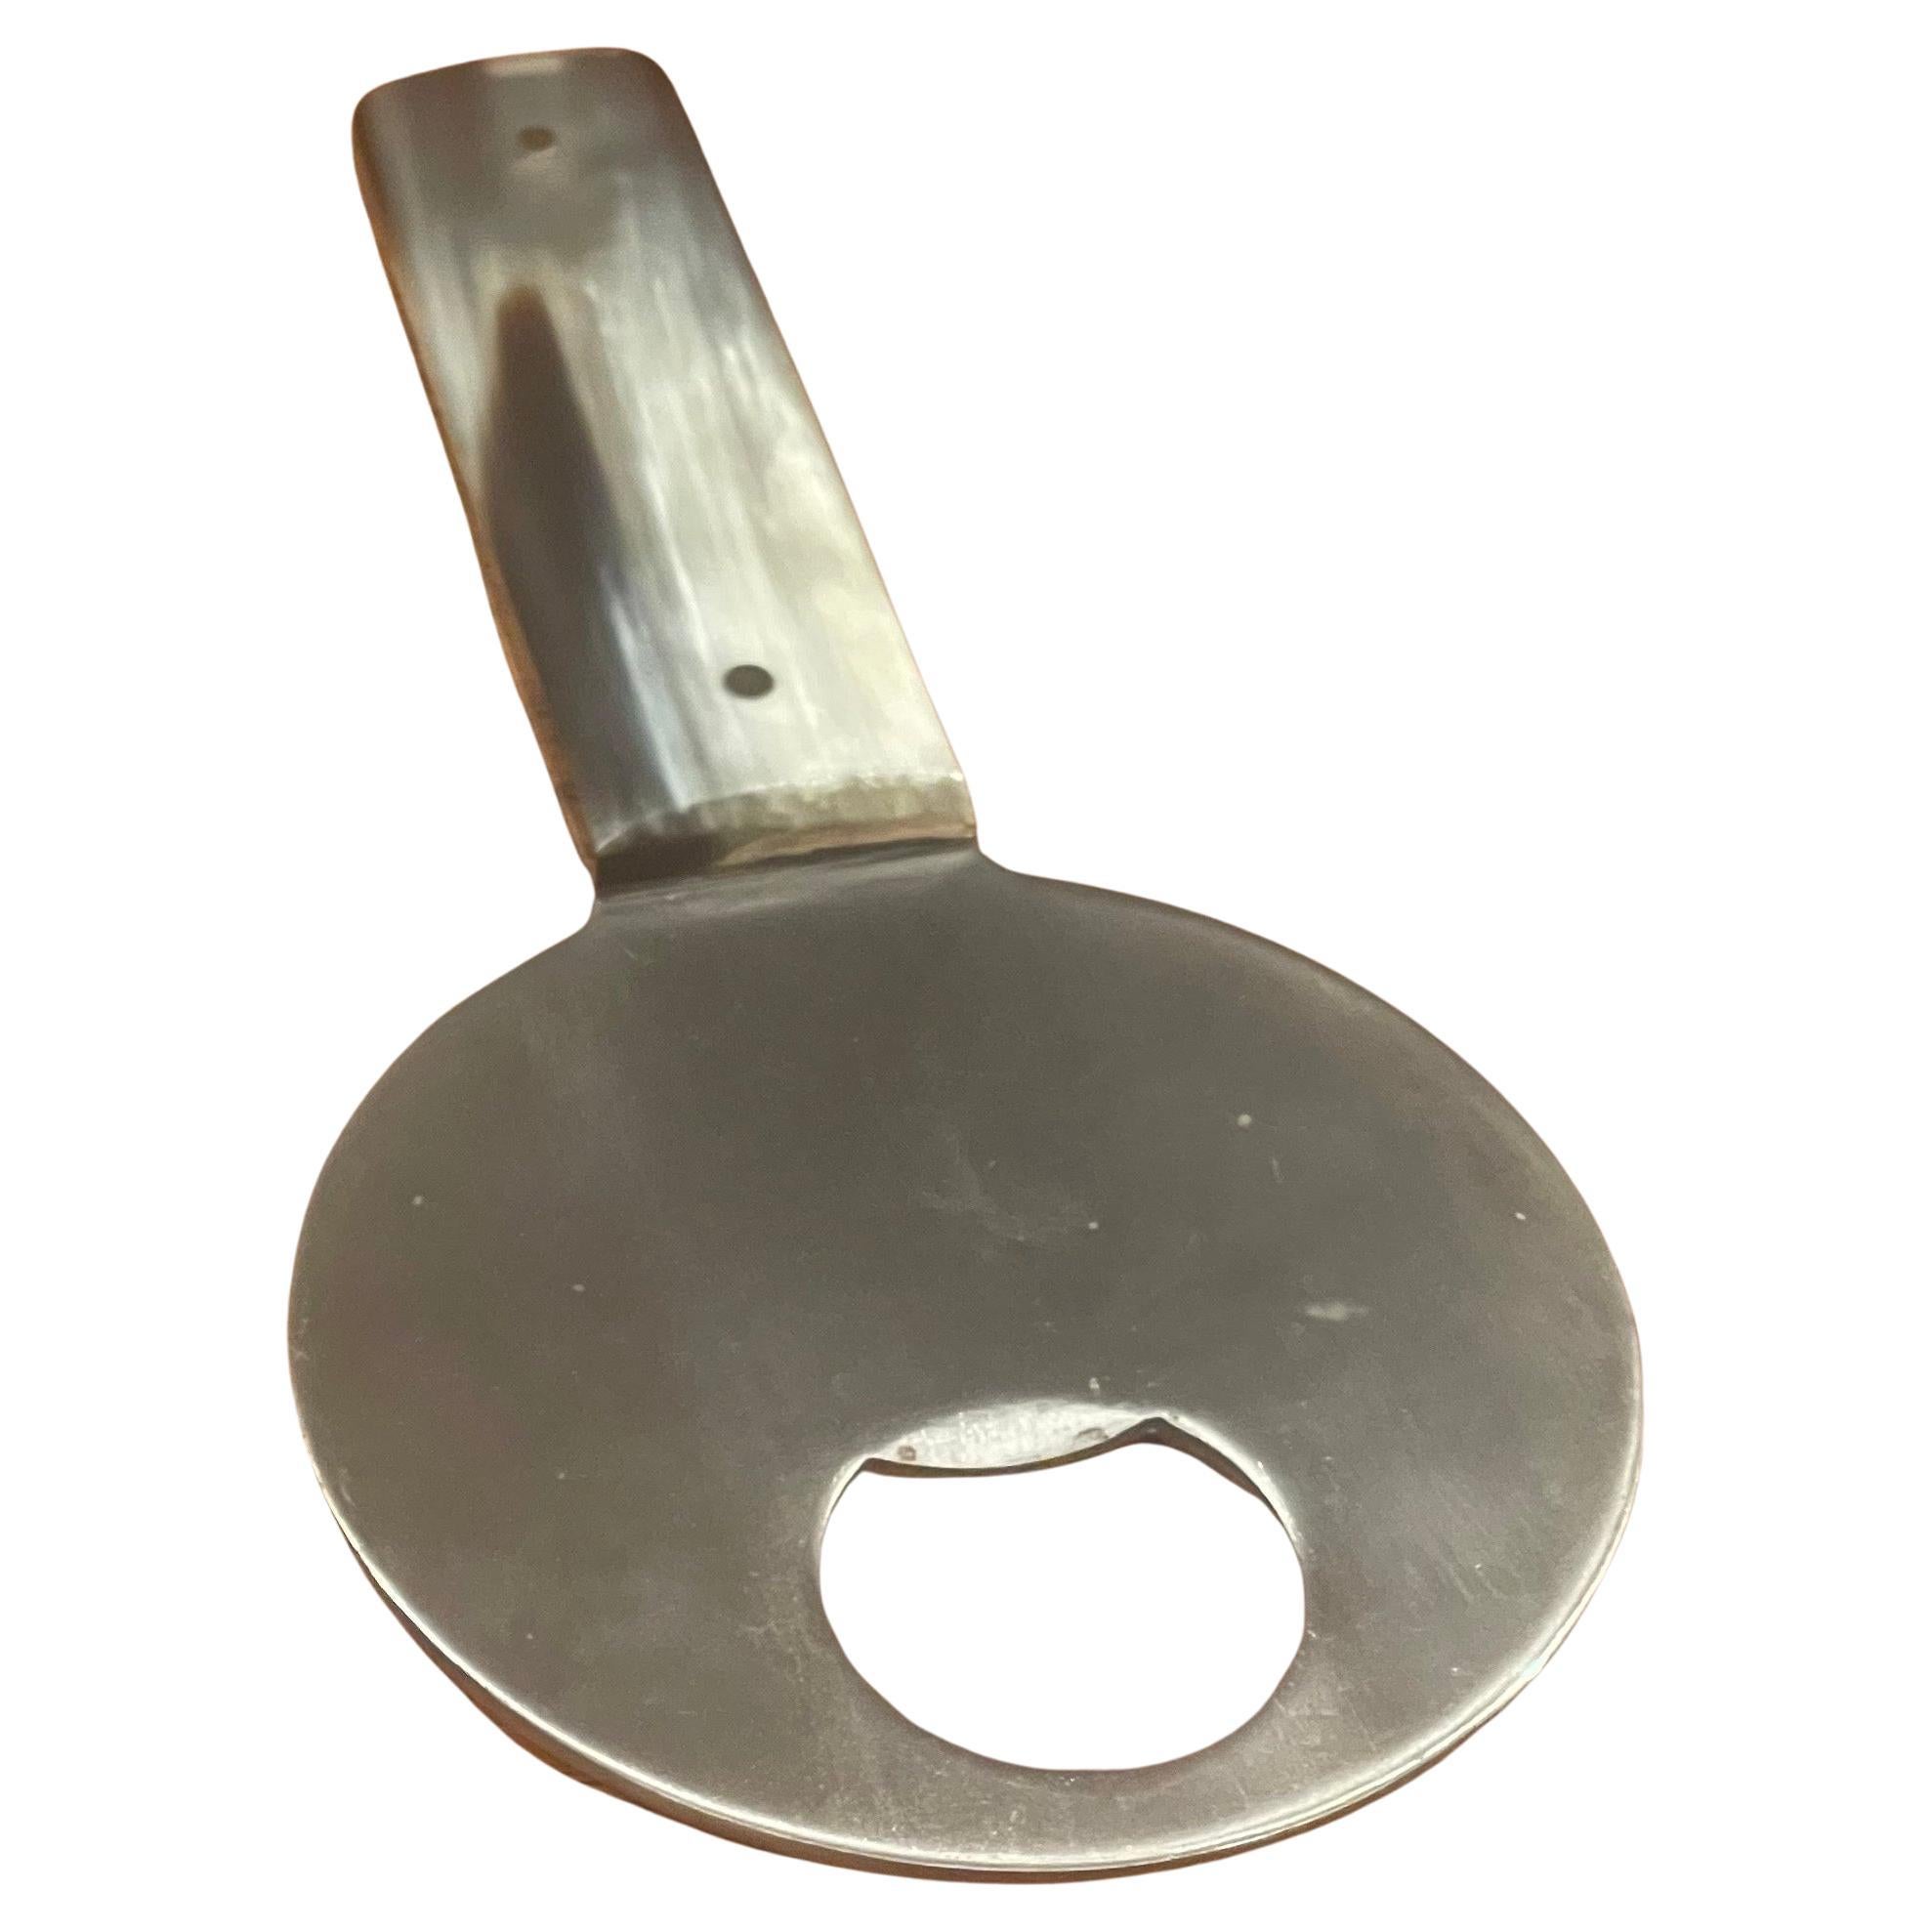 Beautiful vintage stainless steel and horn bottle opener by Carl Auböck, circa 1950s. The piece was hand-crafted in Austria, is in great vintage condition and measures 3